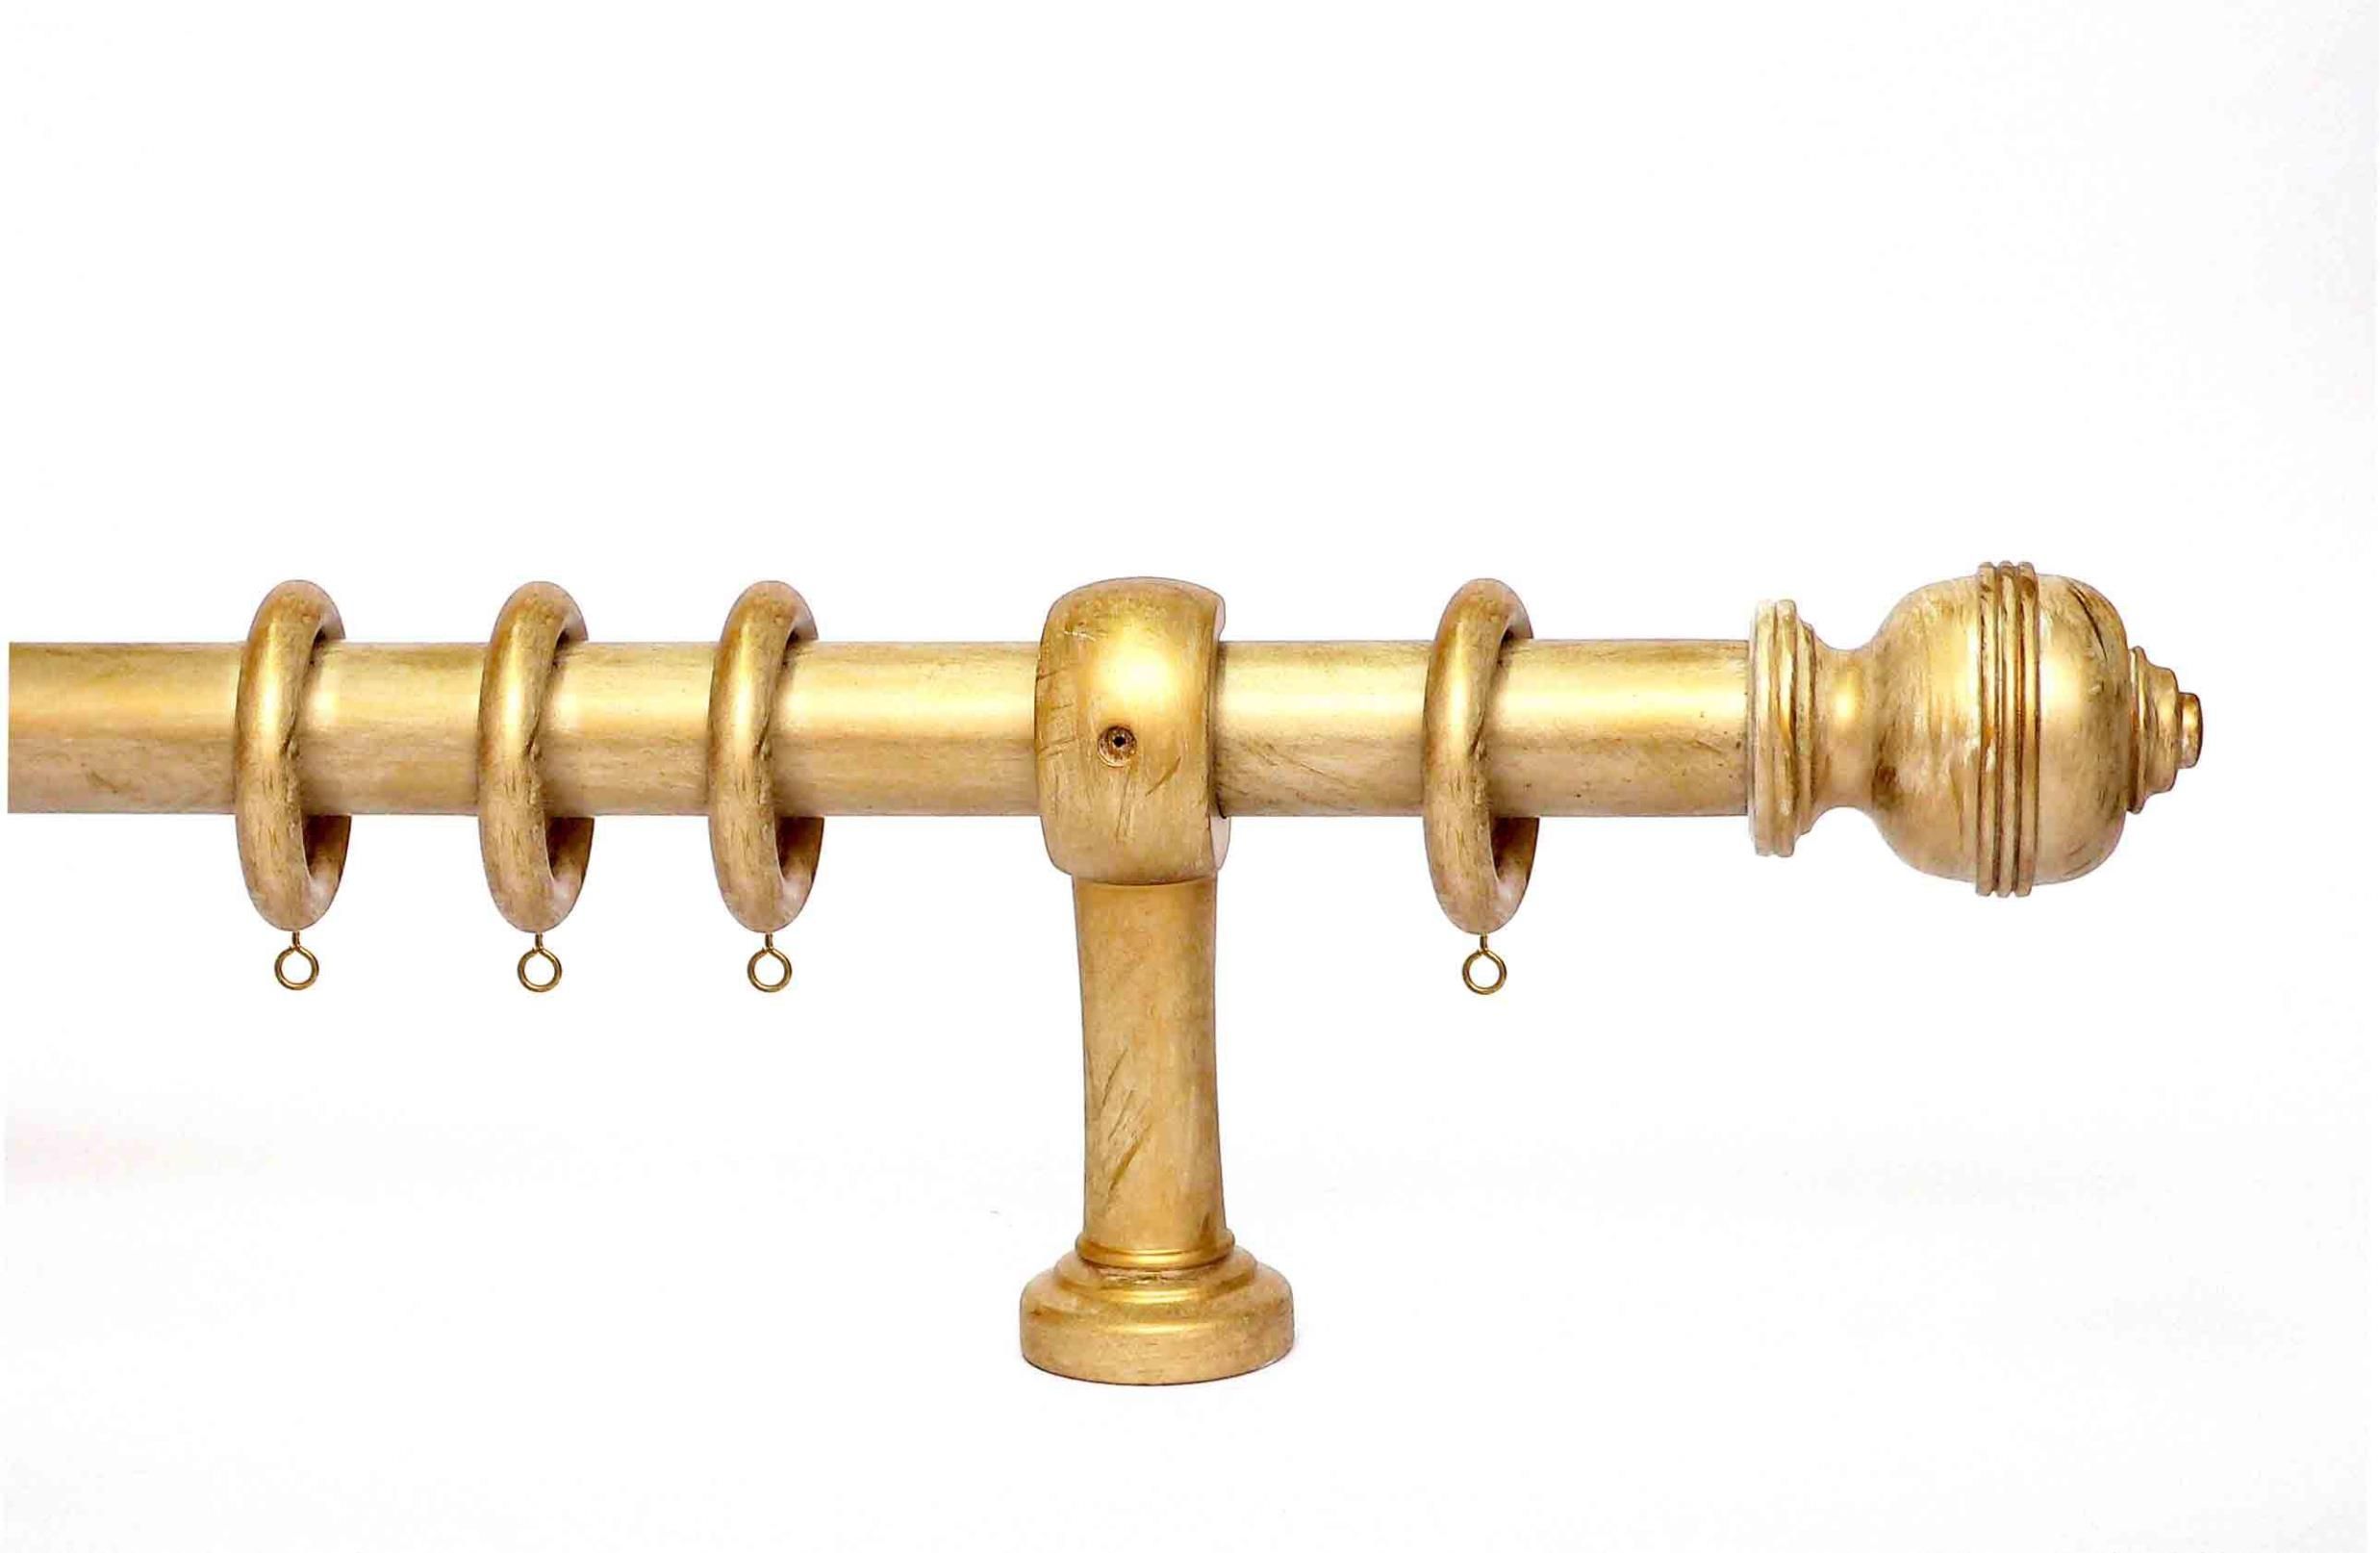 Antique Gold Curtain Rods Doherty House Elegant Gold Curtain Rod Pertaining To Antique Curtain Rods (View 11 of 25)